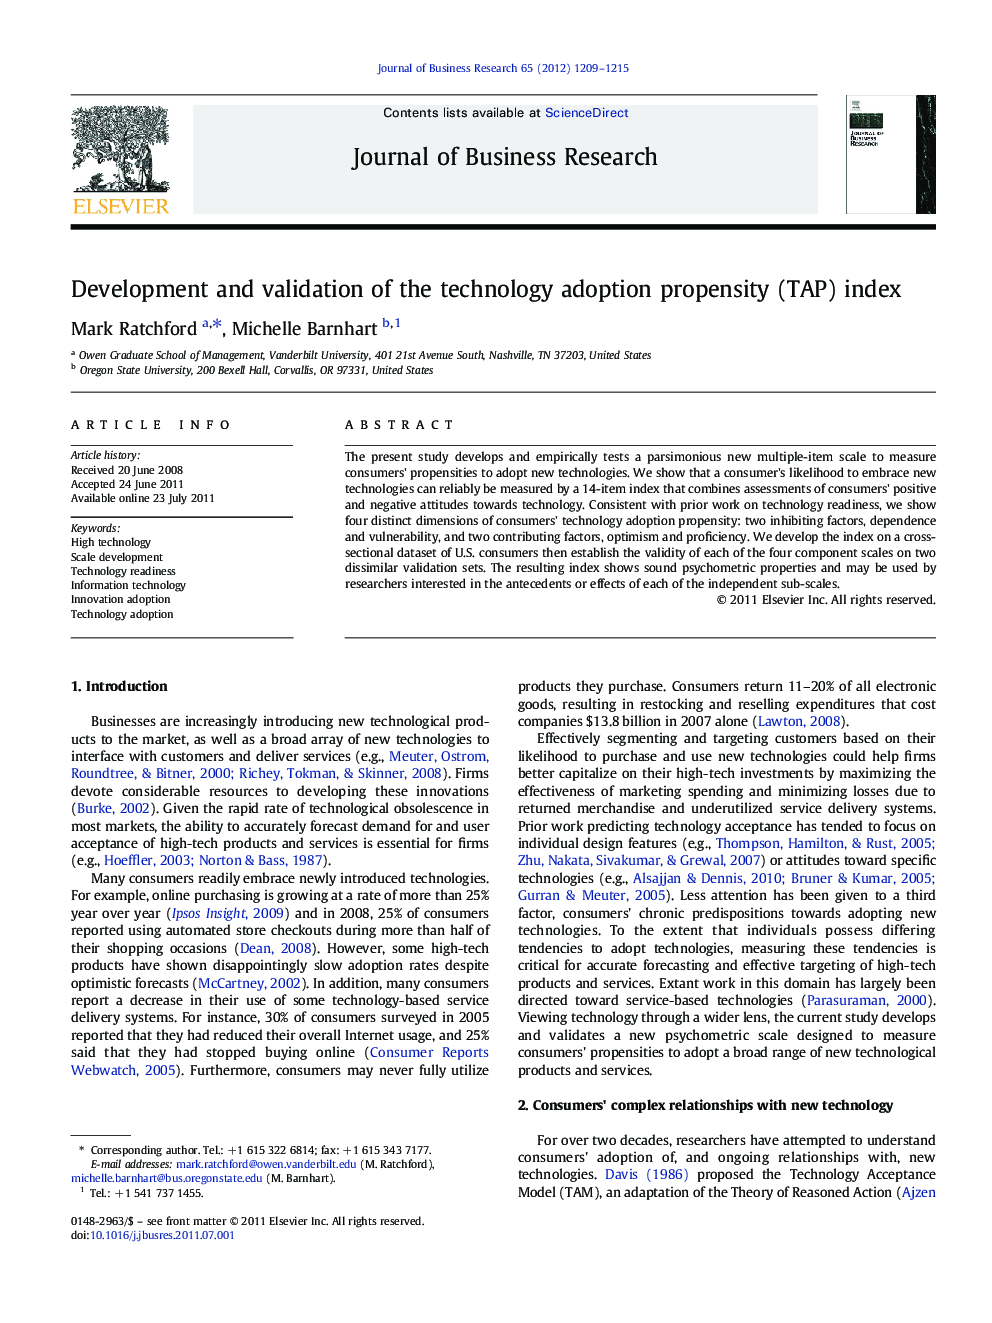 Development and validation of the technology adoption propensity (TAP) index